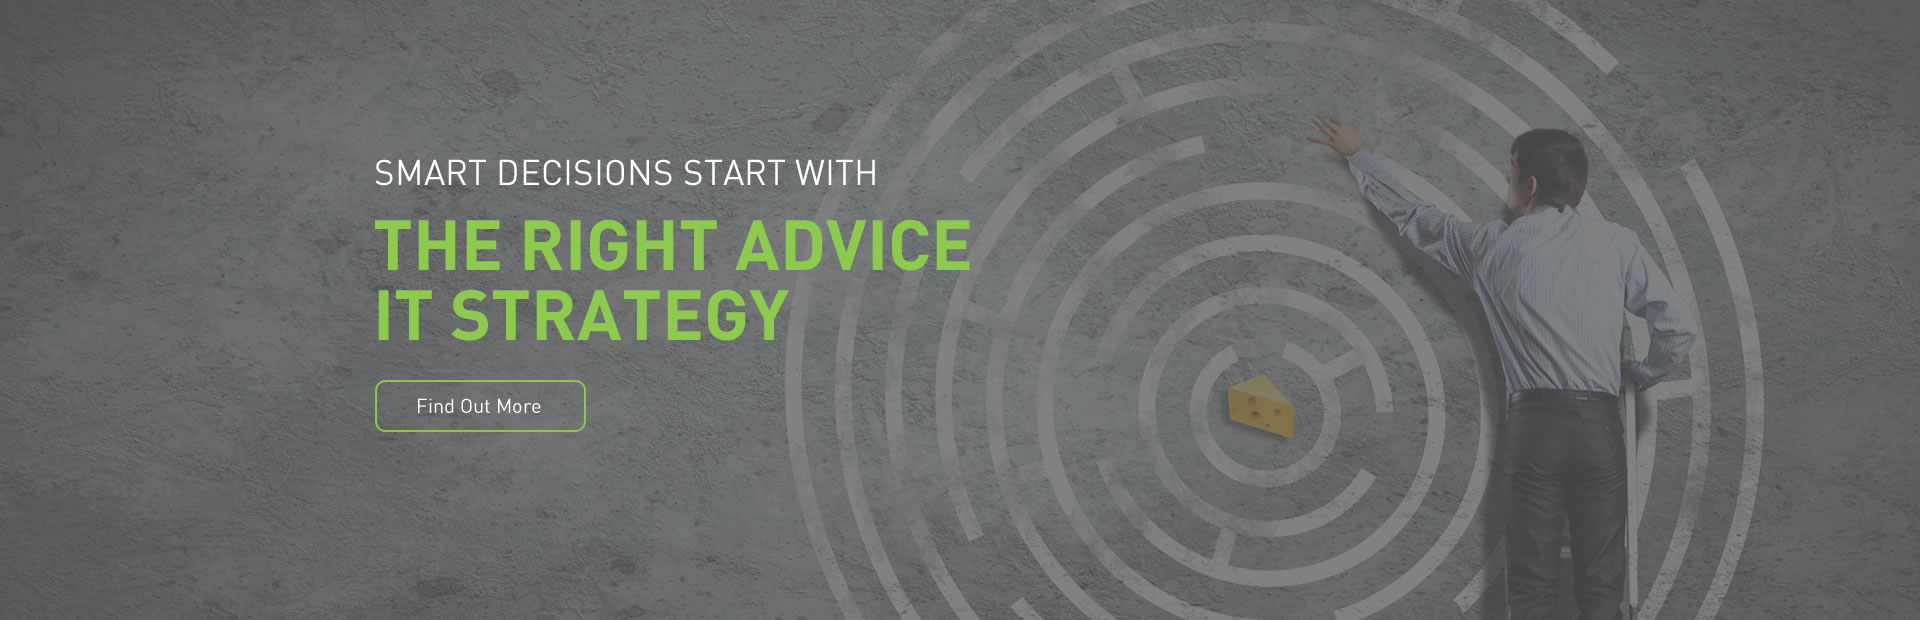 The right advice, IT strategy